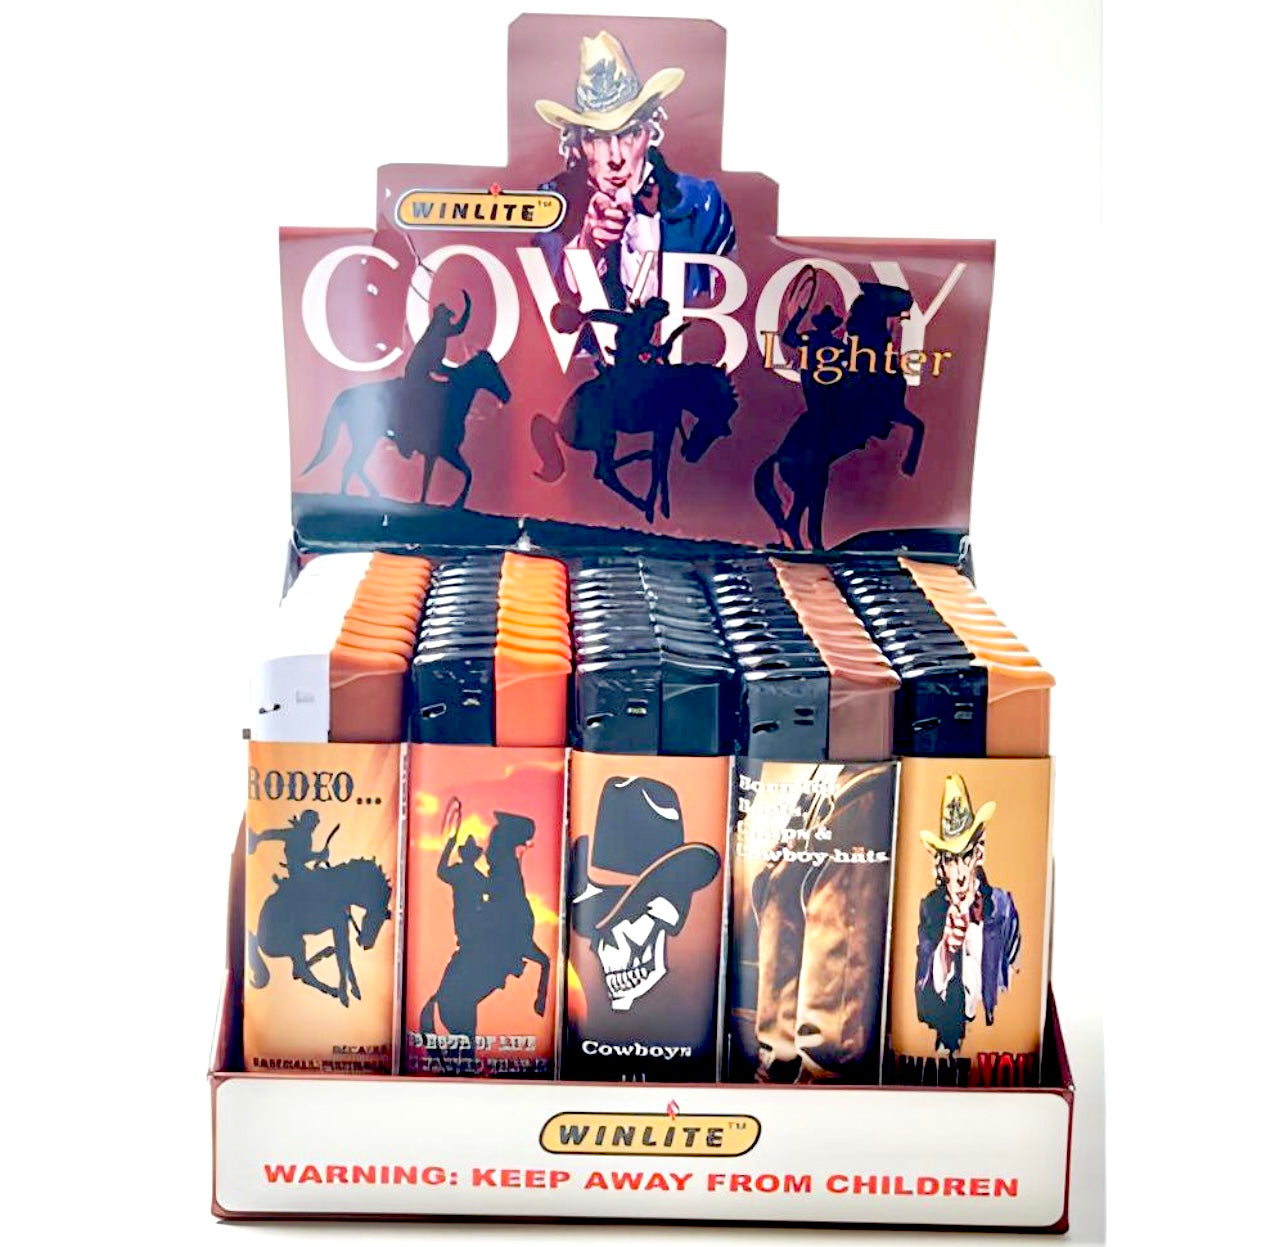 Winlite Cowboy Electronic Lighters 50 Count Pythonbrands